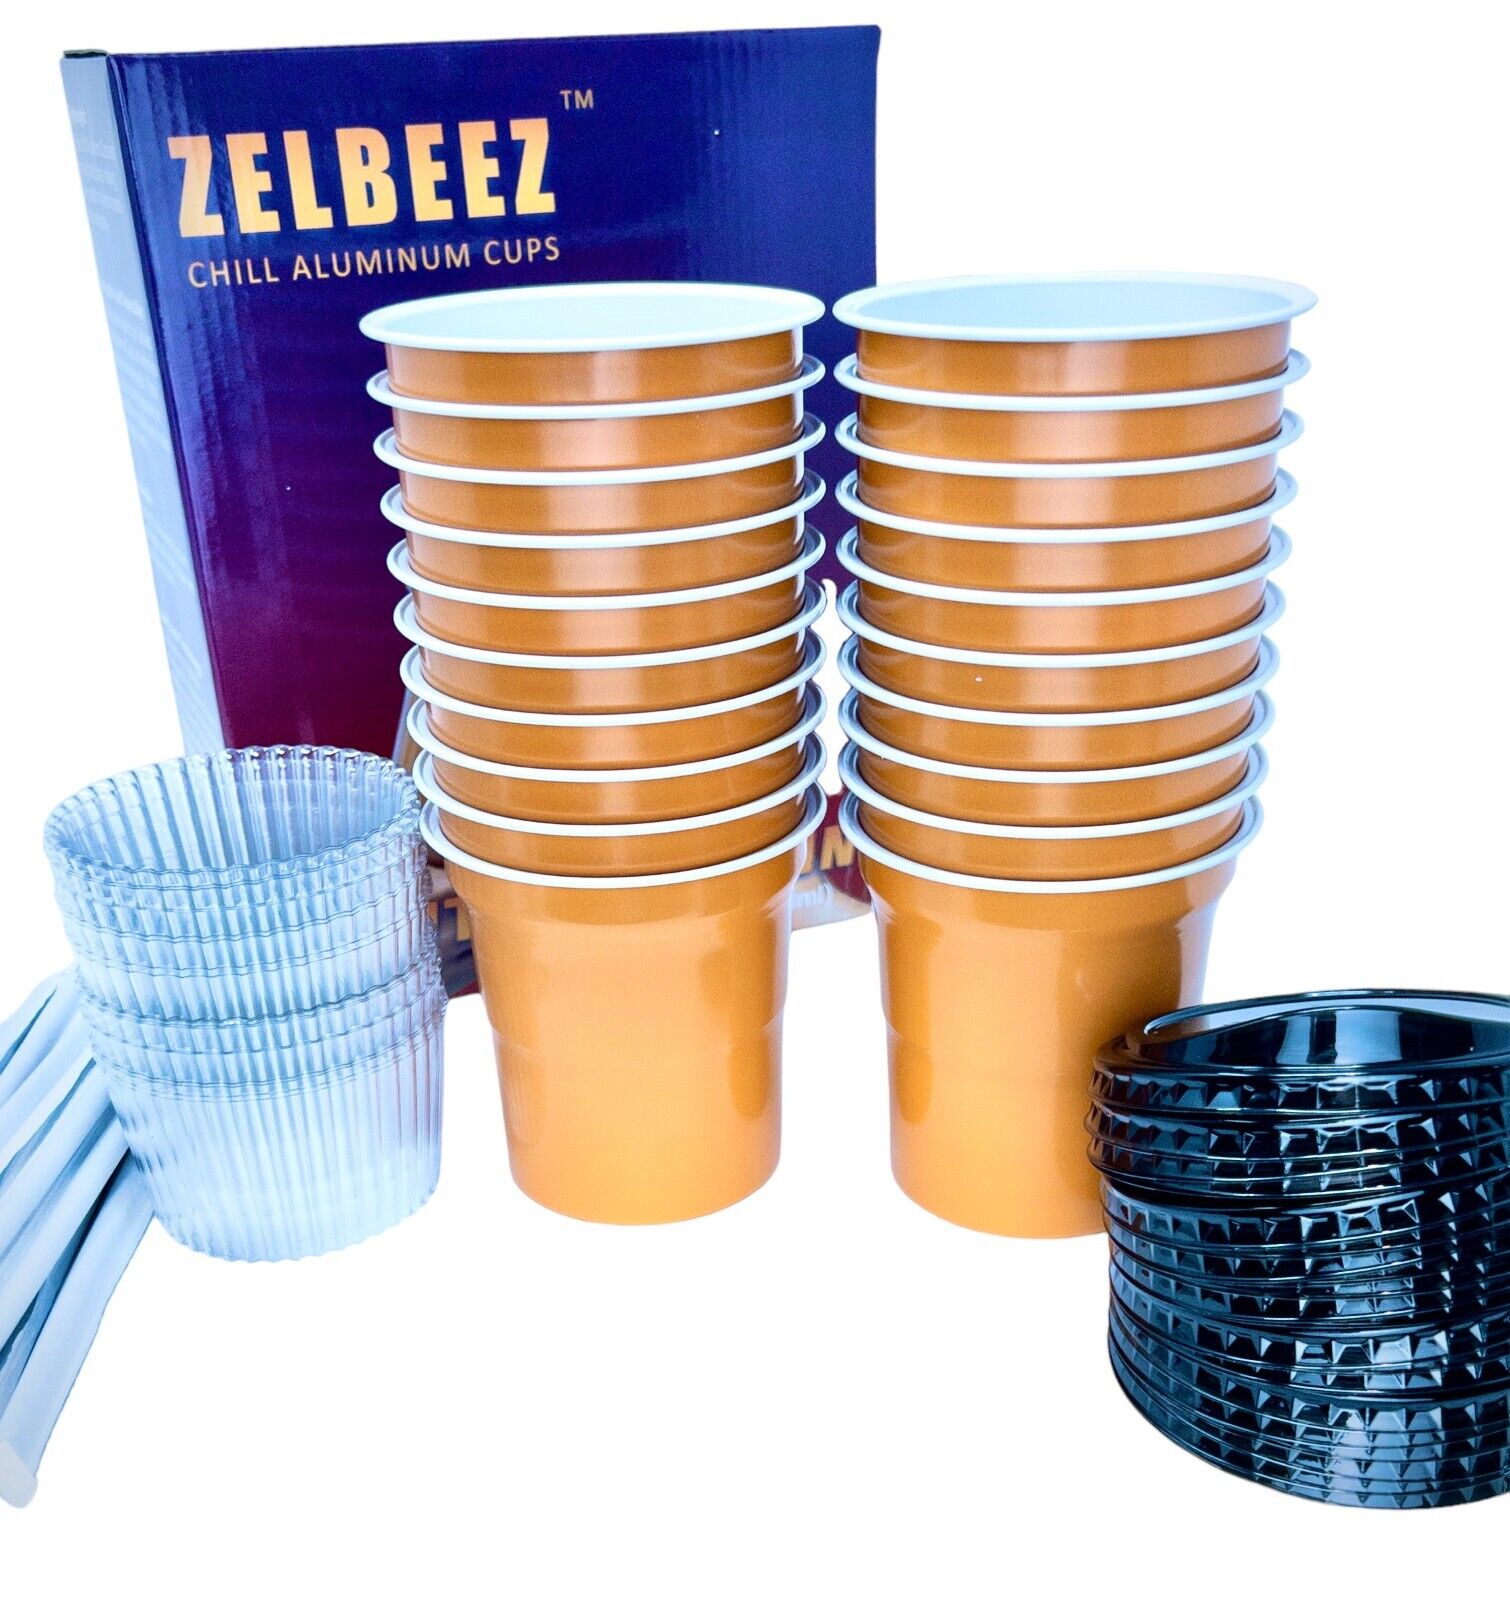 20 Zelbeez Chill Aluminum Cups, Dishwasher Safe, Orange & White, 100% Recyclable